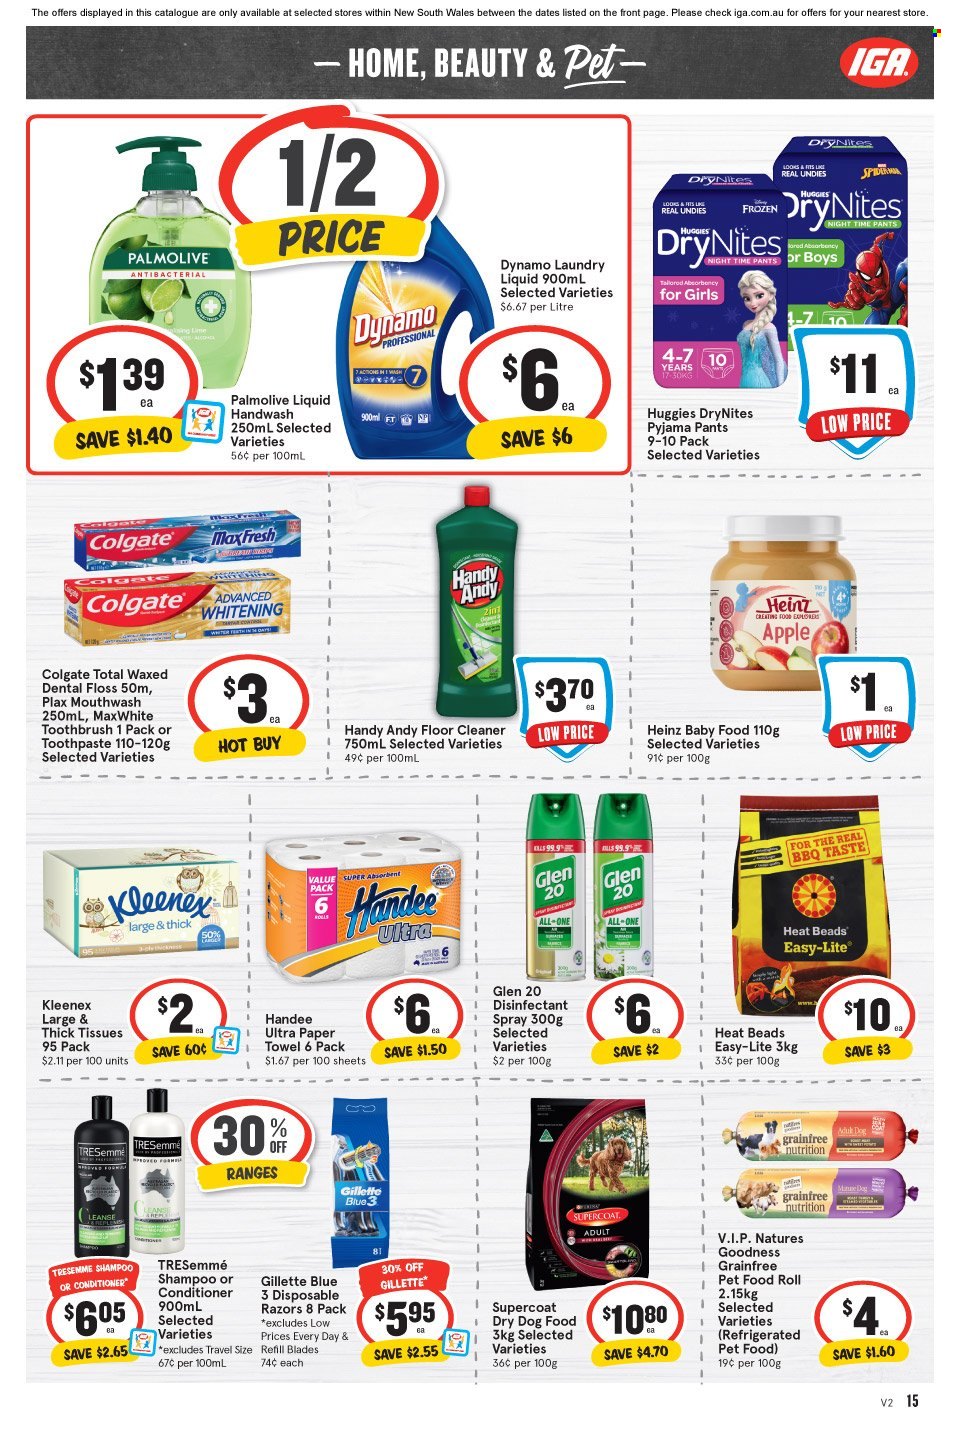 thumbnail - IGA Catalogue - 15 Sep 2021 - 21 Sep 2021 - Sales products - Heinz, Huggies, pants, DryNites, Kleenex, tissues, Handee, paper towels, cleaner, desinfection, floor cleaner, laundry detergent, shampoo, hand wash, Palmolive, Colgate, toothbrush, toothpaste, mouthwash, Plax, conditioner, TRESemmé, Gillette, disposable razor, antibacterial spray, animal food, dog food, Supercoat, dry dog food. Page 11.